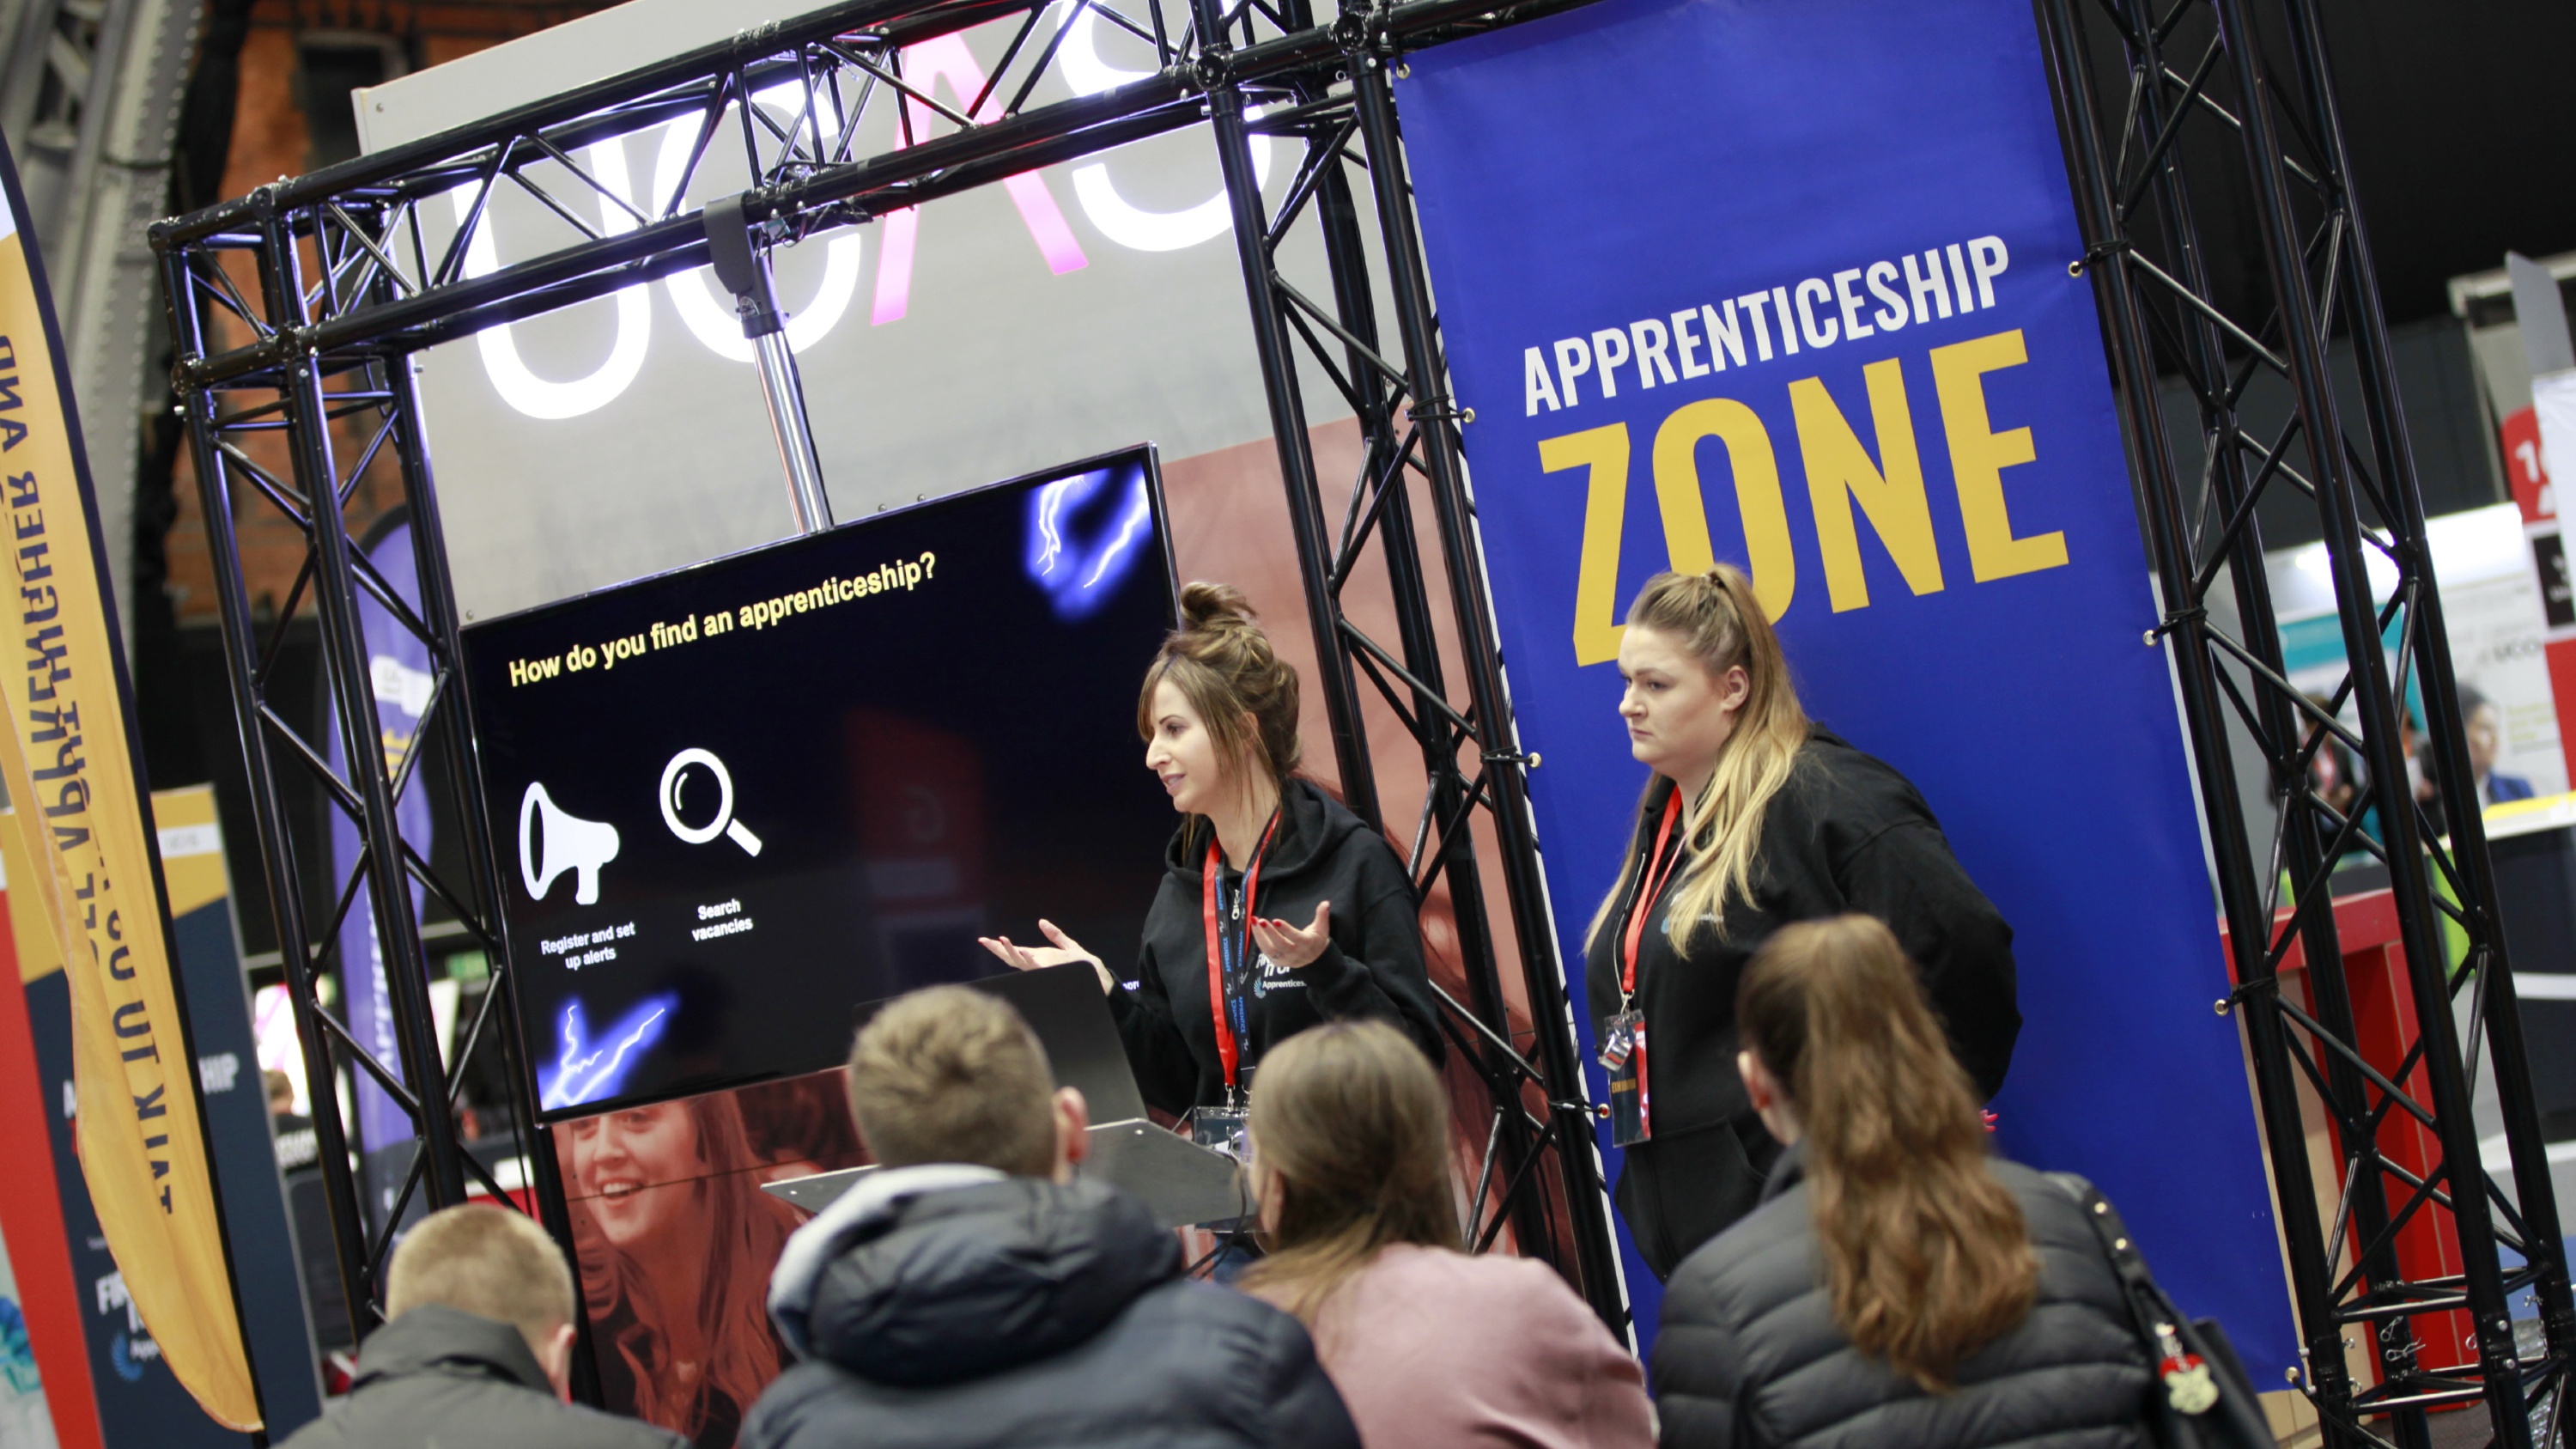 The Apprenticeship Zone at a UCAS event